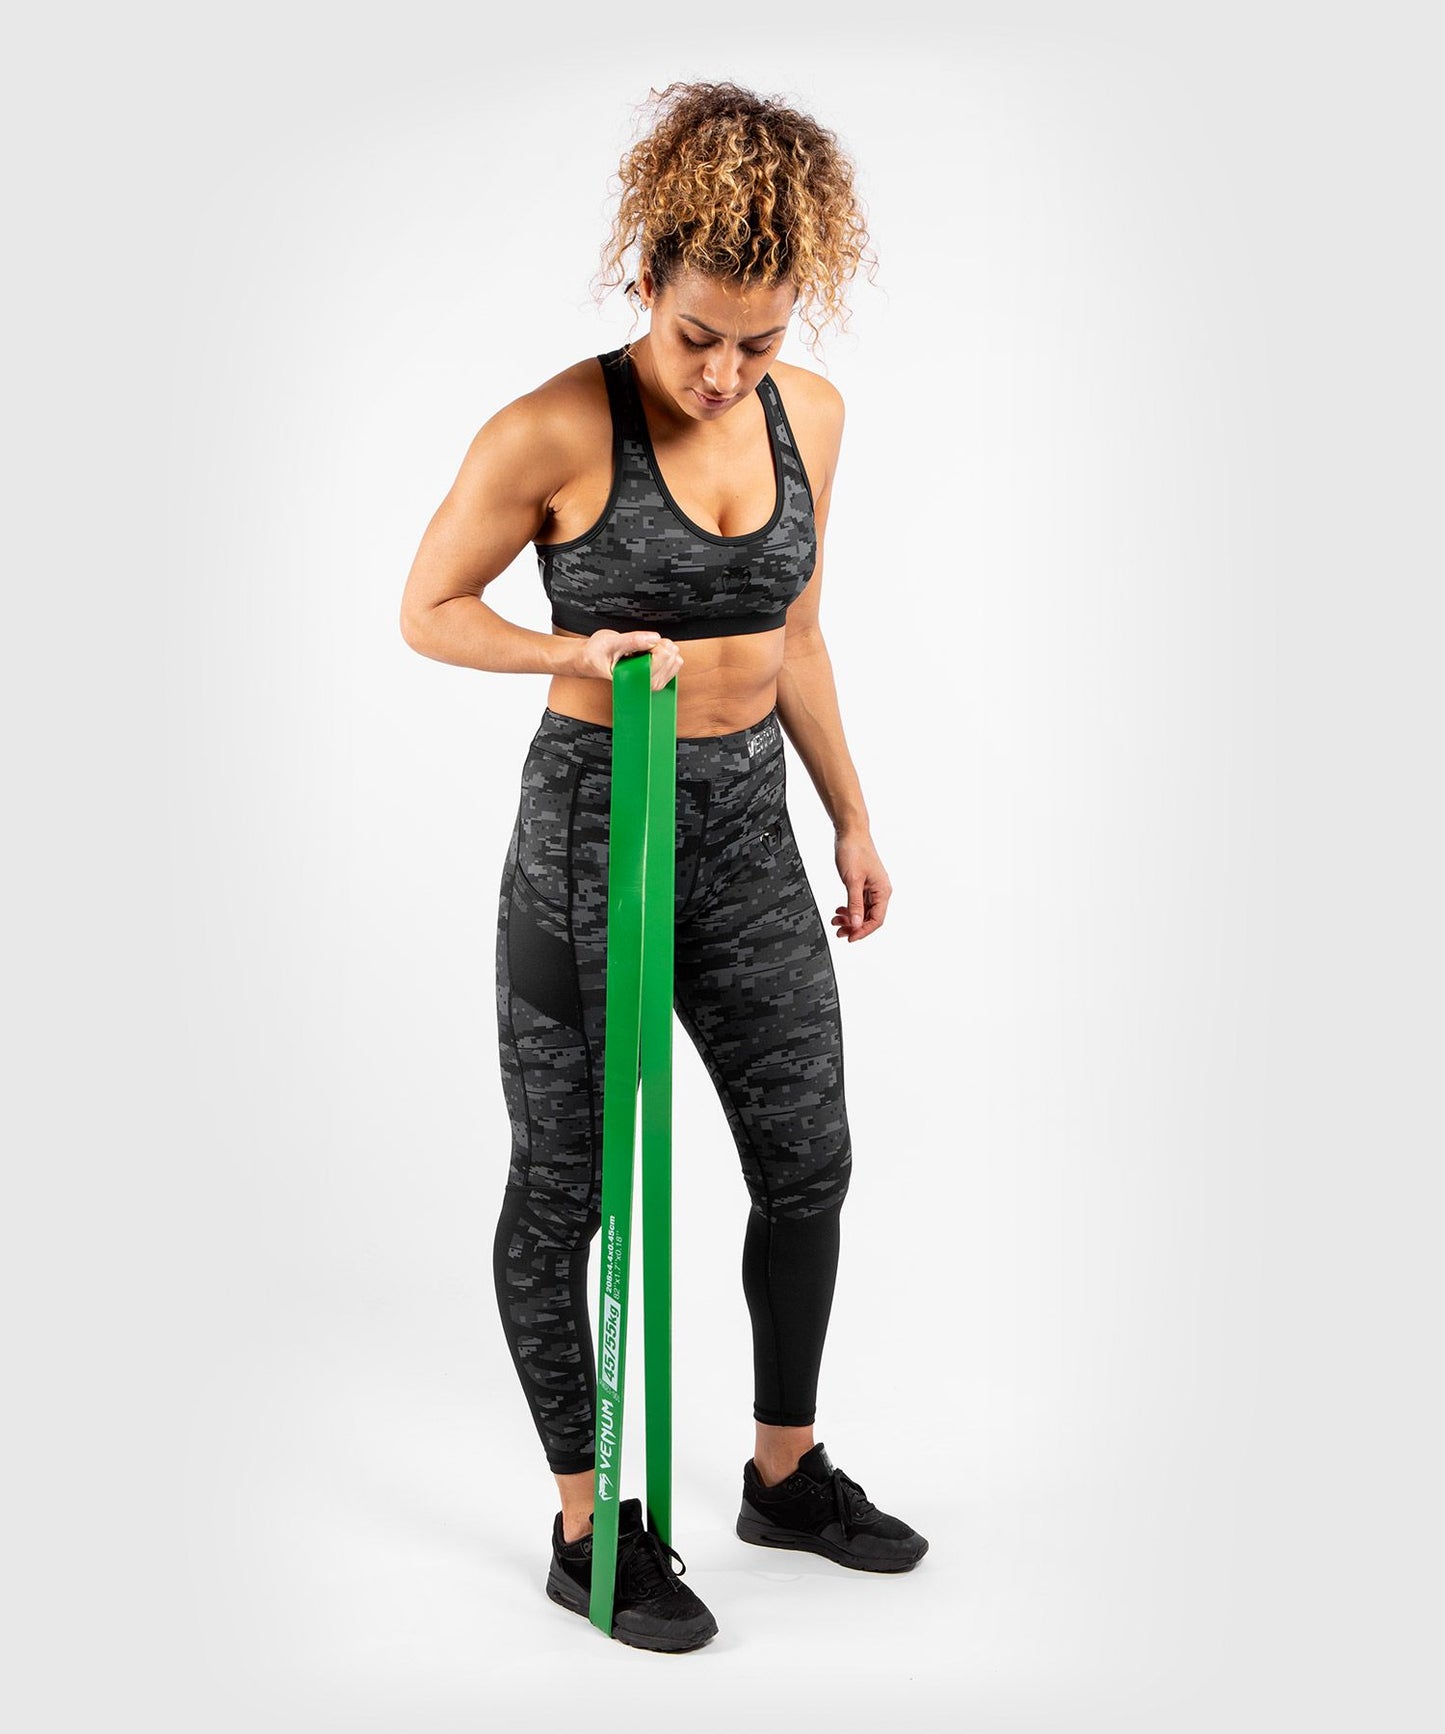 Challenger Resistance Band-Green-100-120LBS